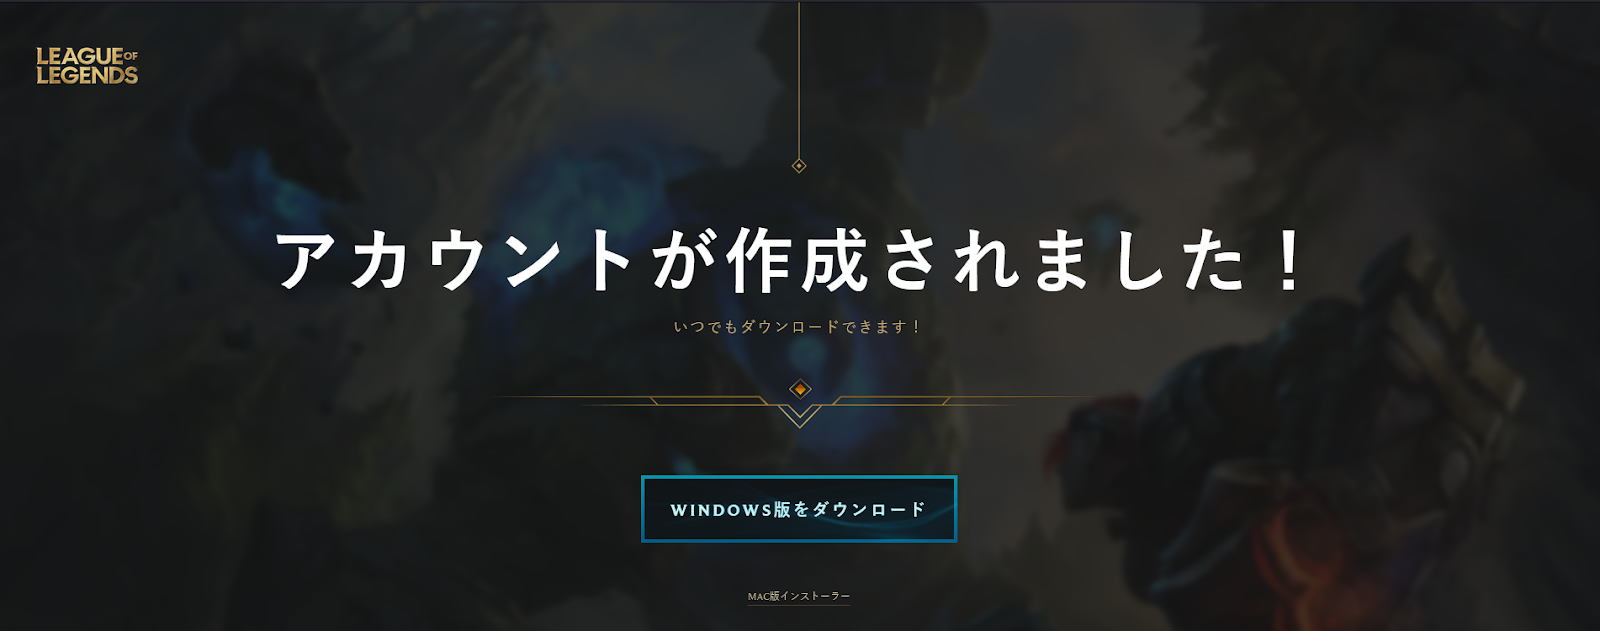 huid auditie Familielid How to play on japanese server League of Legends